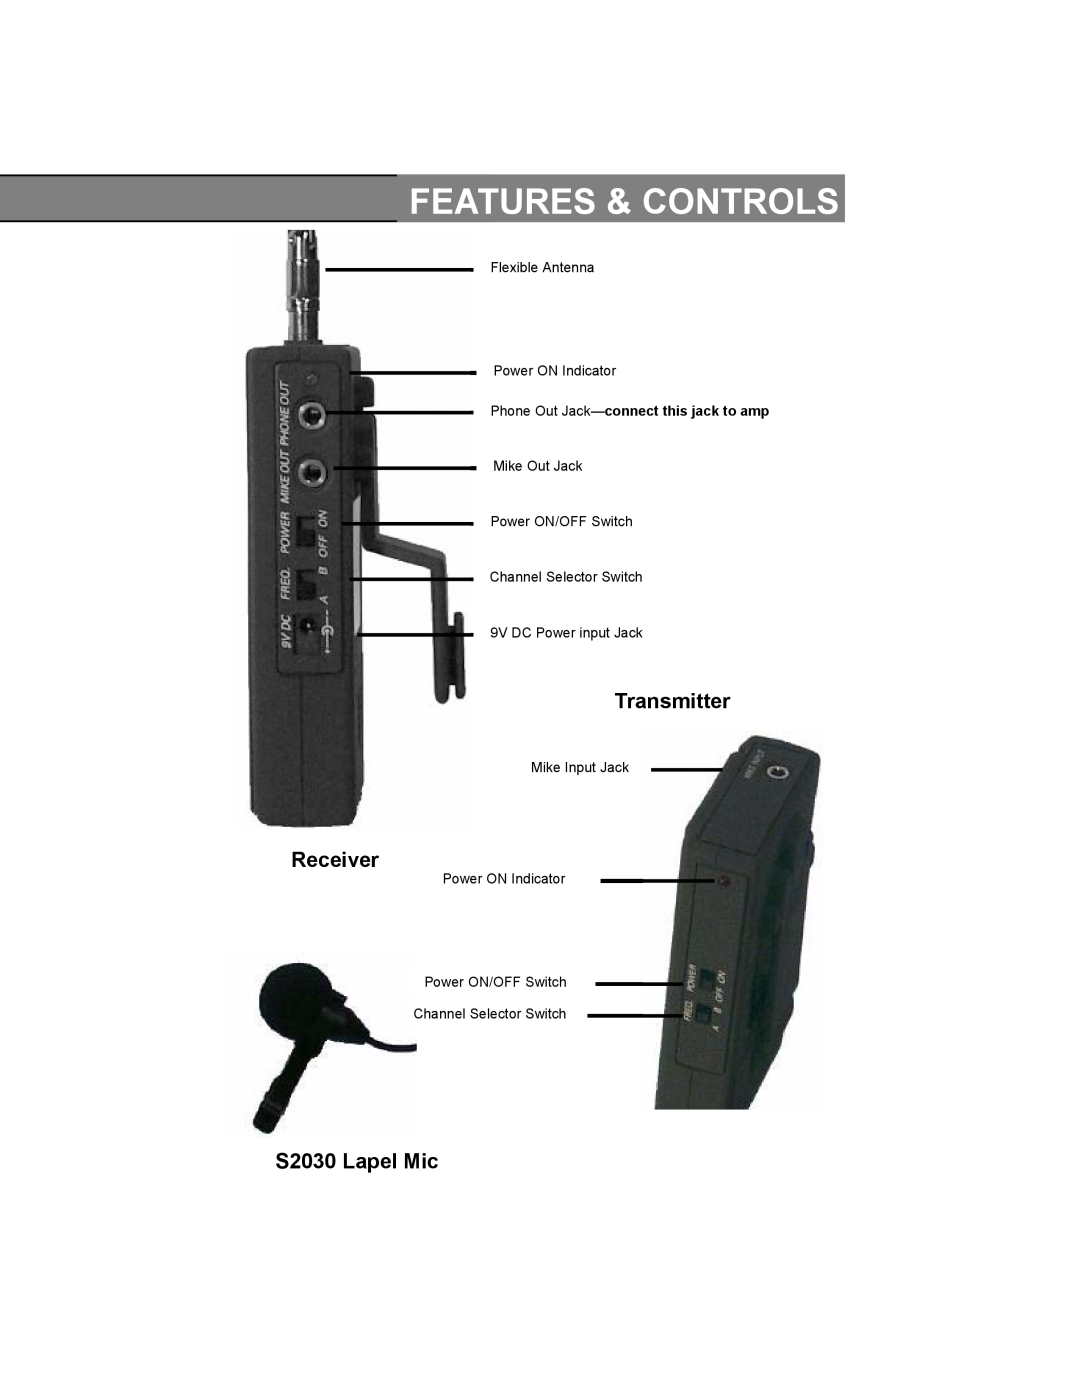 AmpliVox S1600, S1610 Features & Controls, Transmitter, Receiver, S2030 Lapel Mic, Flexible Antenna Power ON Indicator 